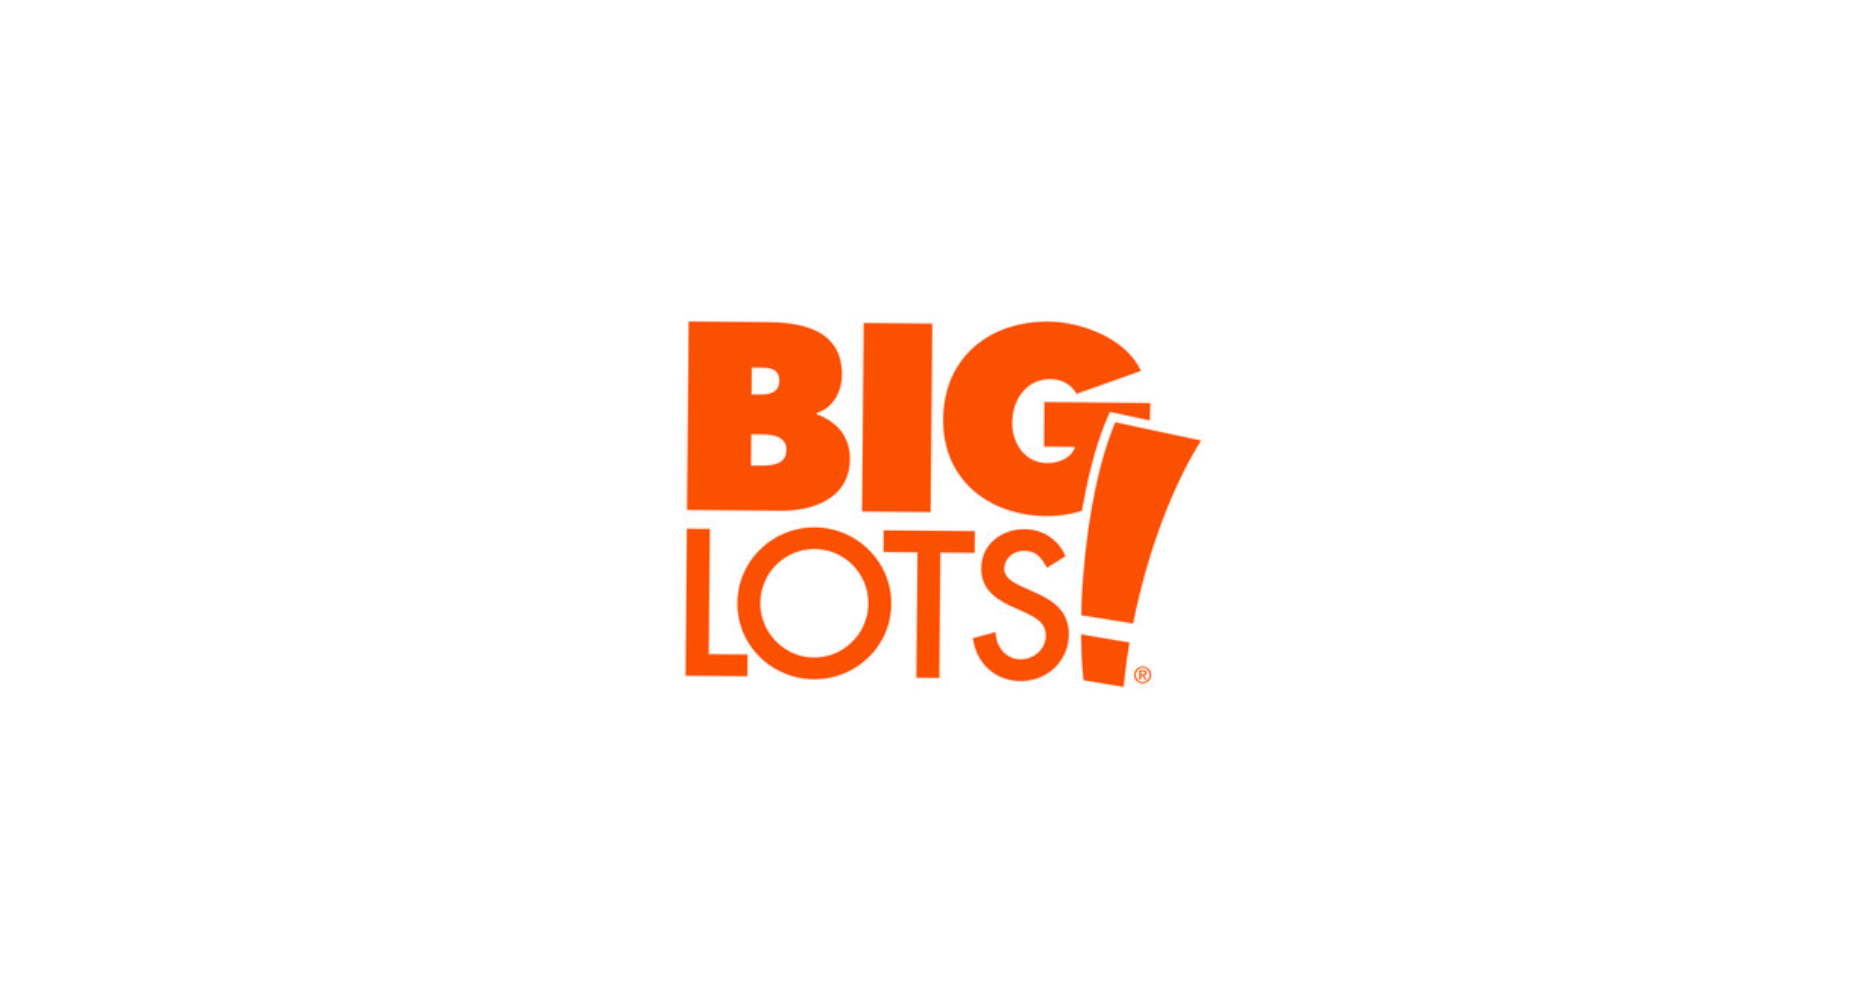 Why Big Lots Shares Are Sliding Today